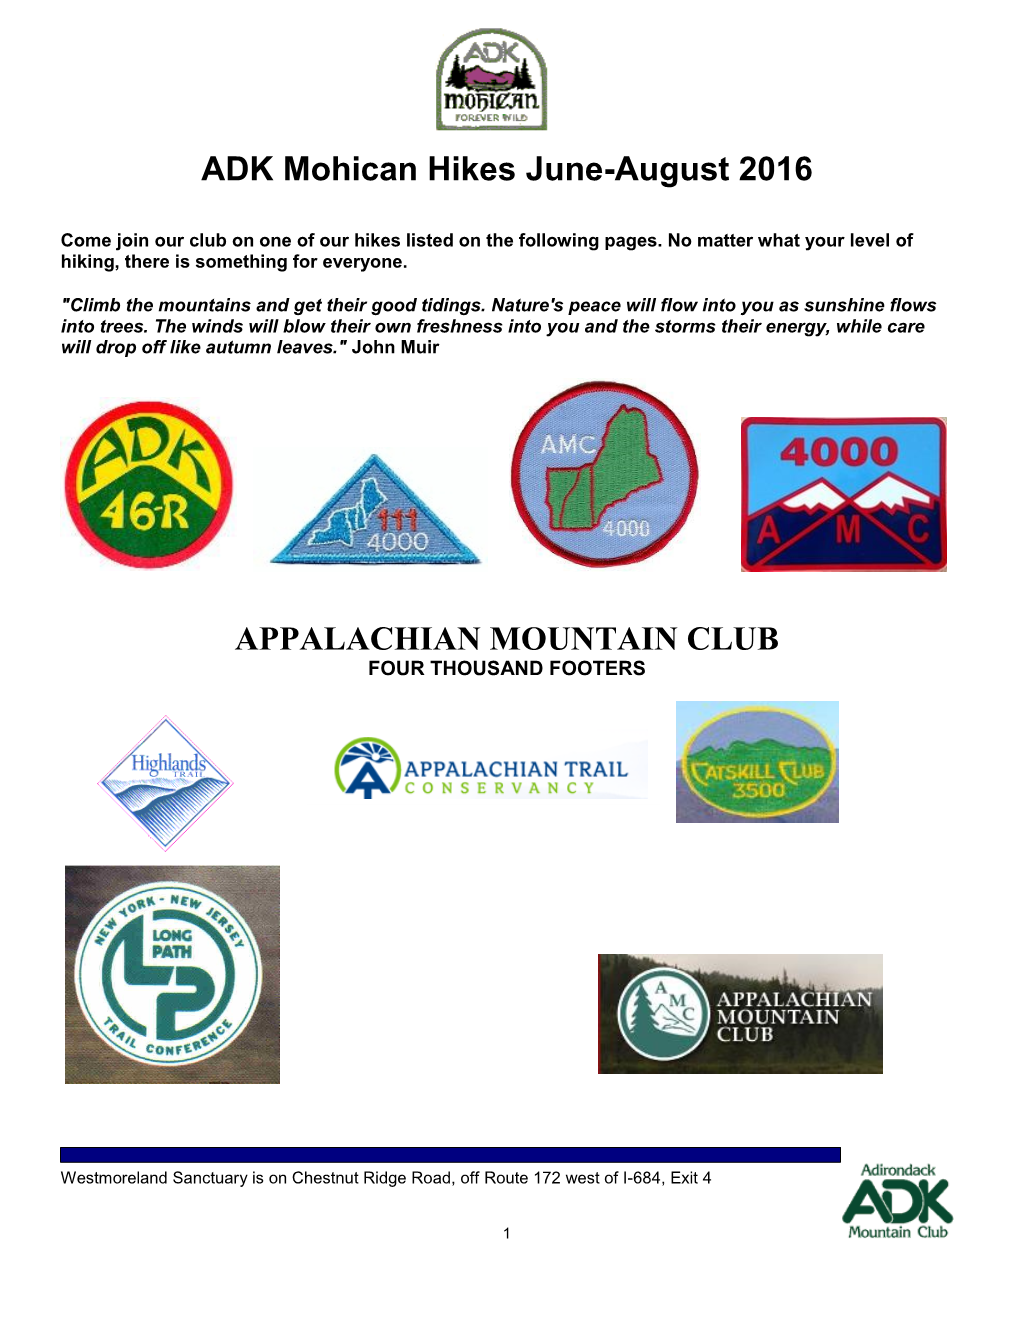 ADK Mohican Hikes June-August 2016 APPALACHIAN MOUNTAIN